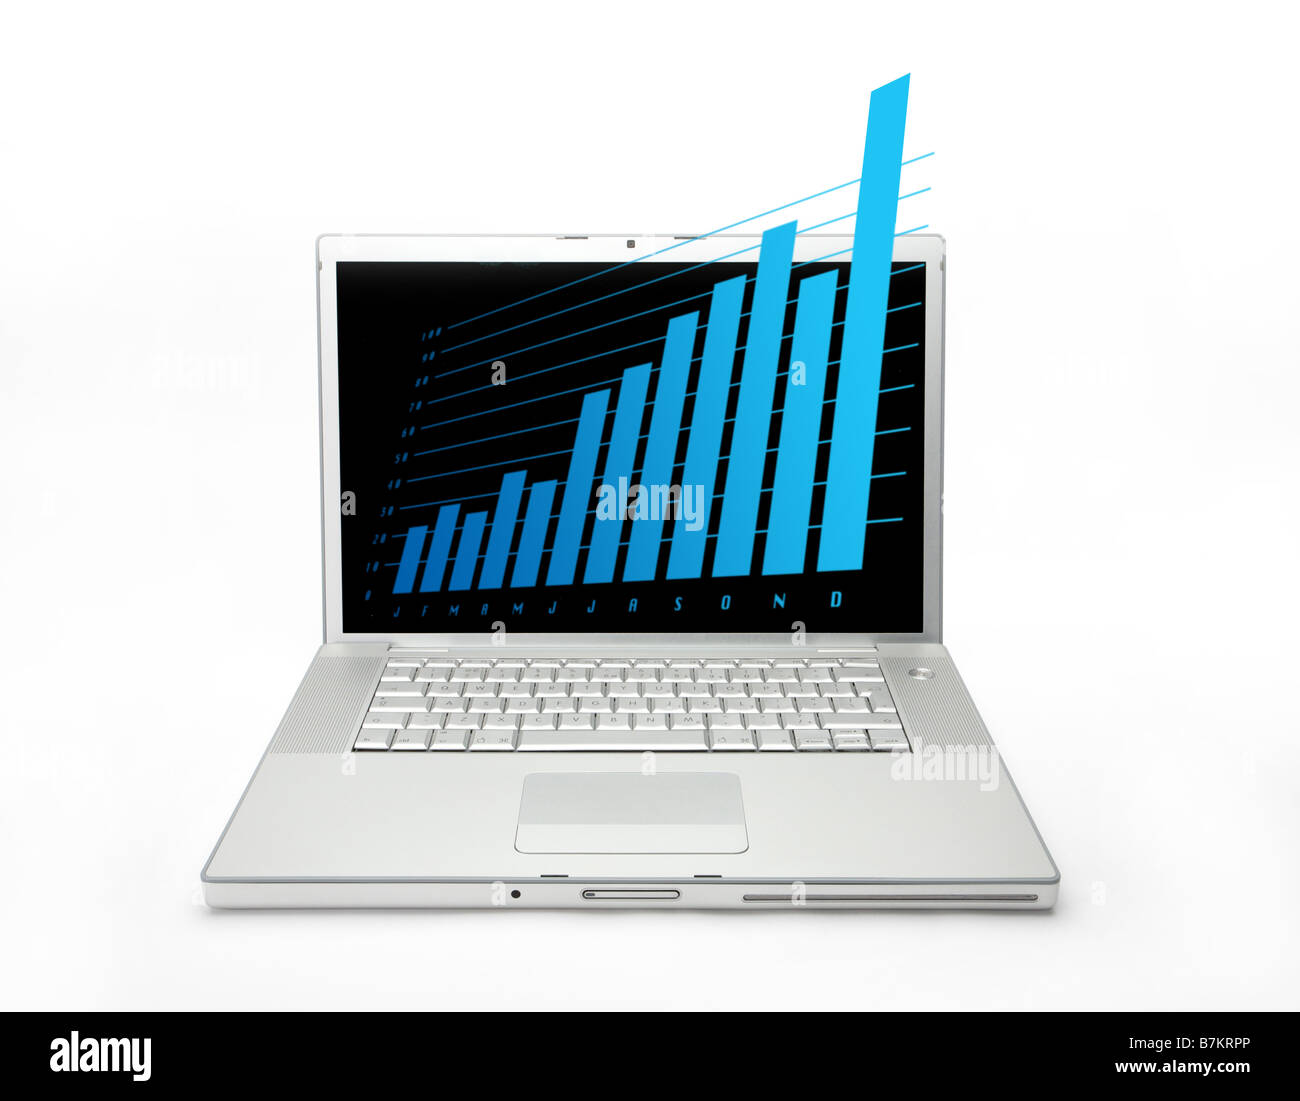 Laptop computer with 3D sales graph showing increasing sales Stock Photo